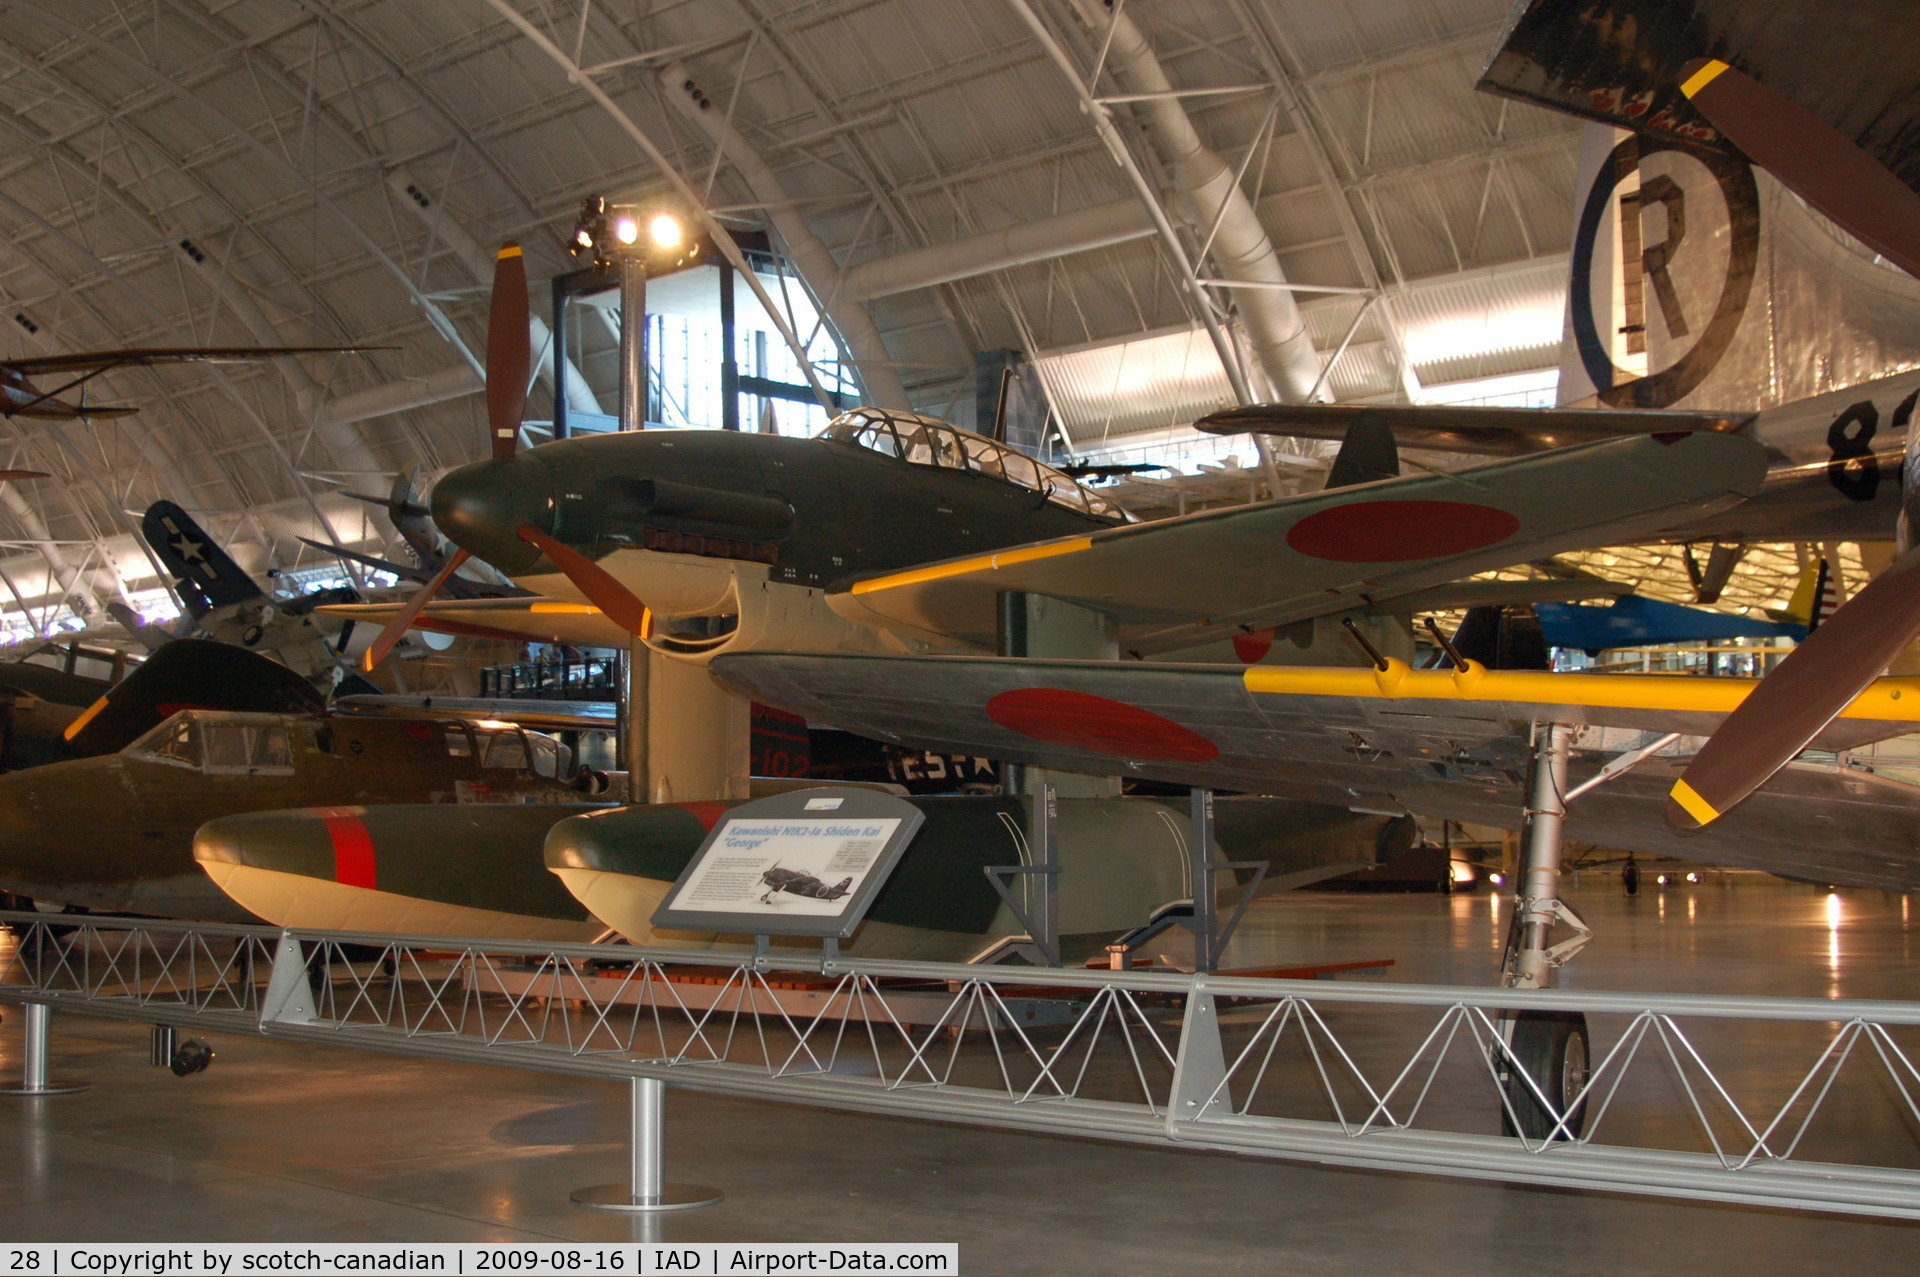 28, Aichi M6A1, Aichi M6A1 Seiran (Clear Sky Storm) at the Steven F. Udvar-Hazy Center, Smithsonian National Air and Space Museum, Chantilly, VA